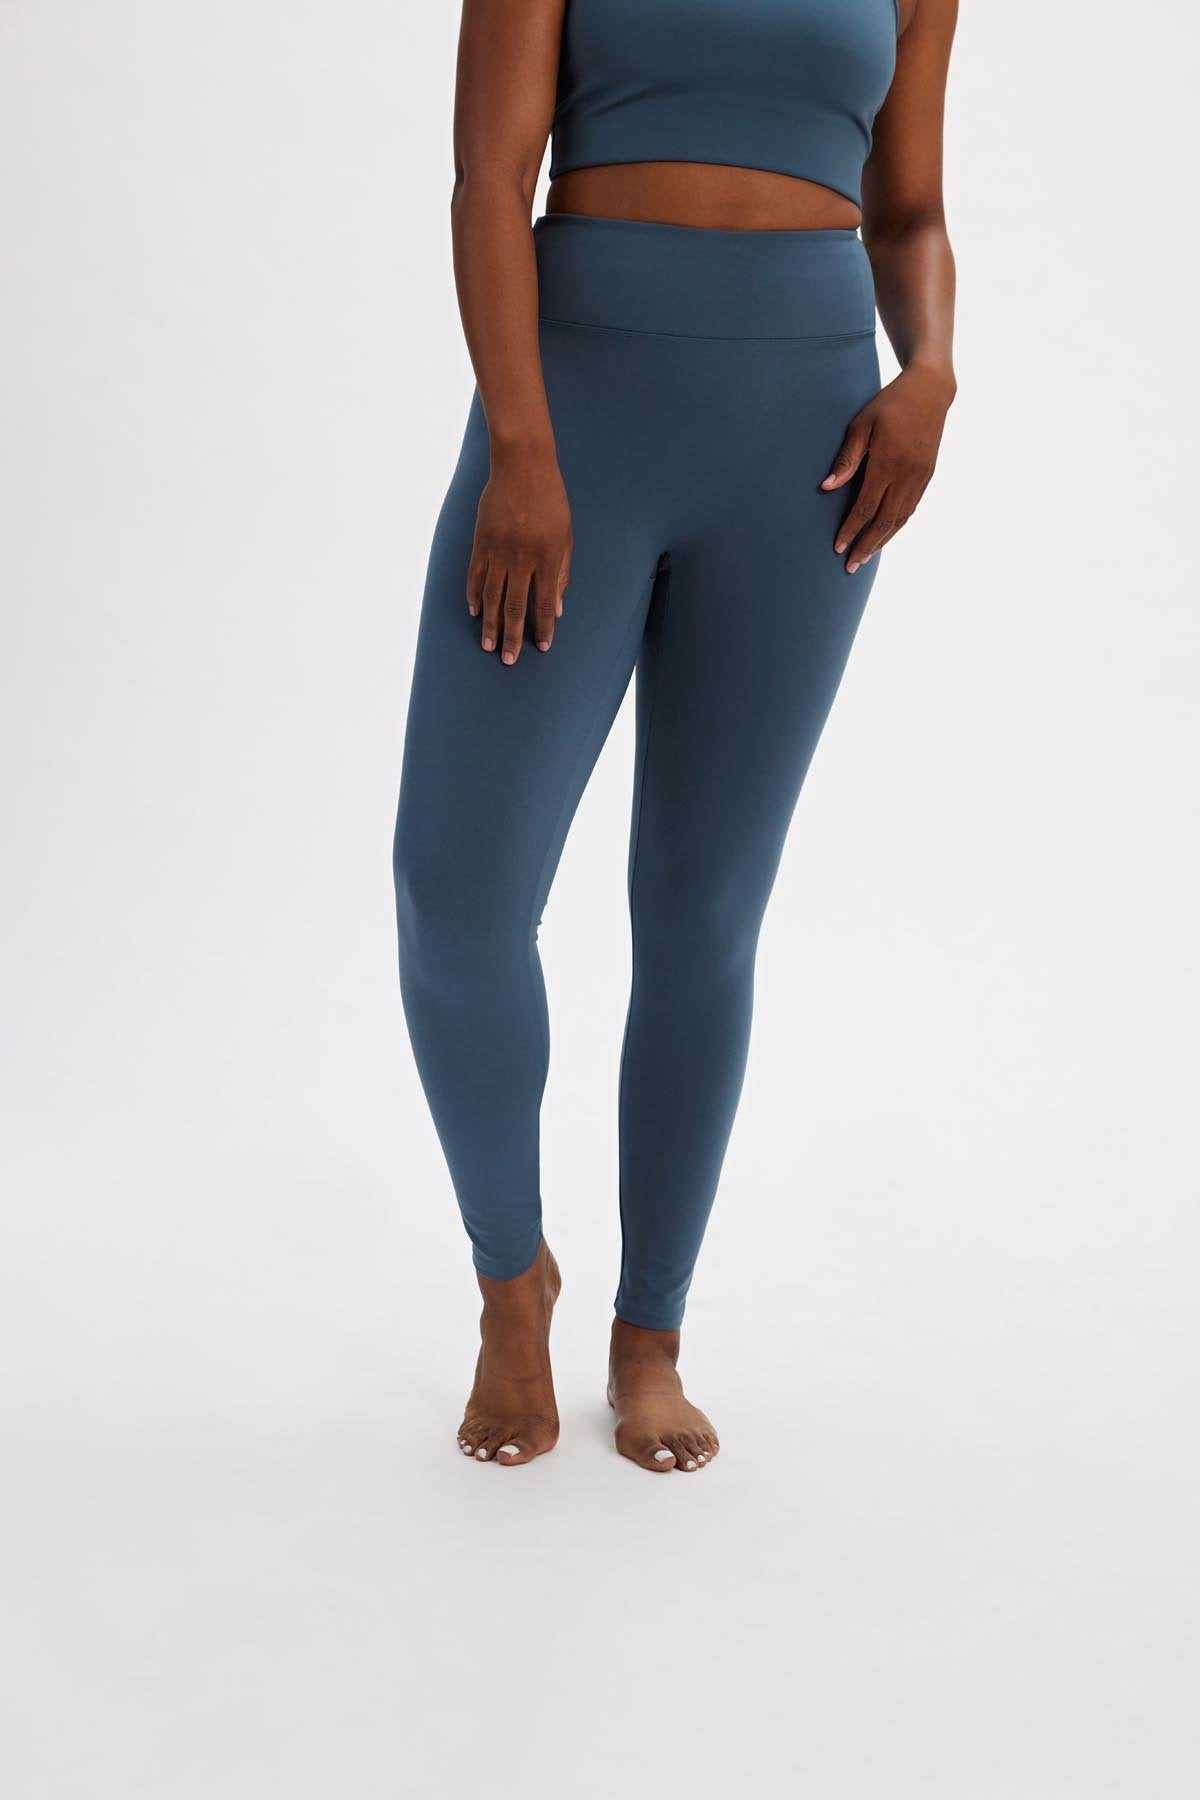 5 leggings you need if fitness is your New Year's resolution